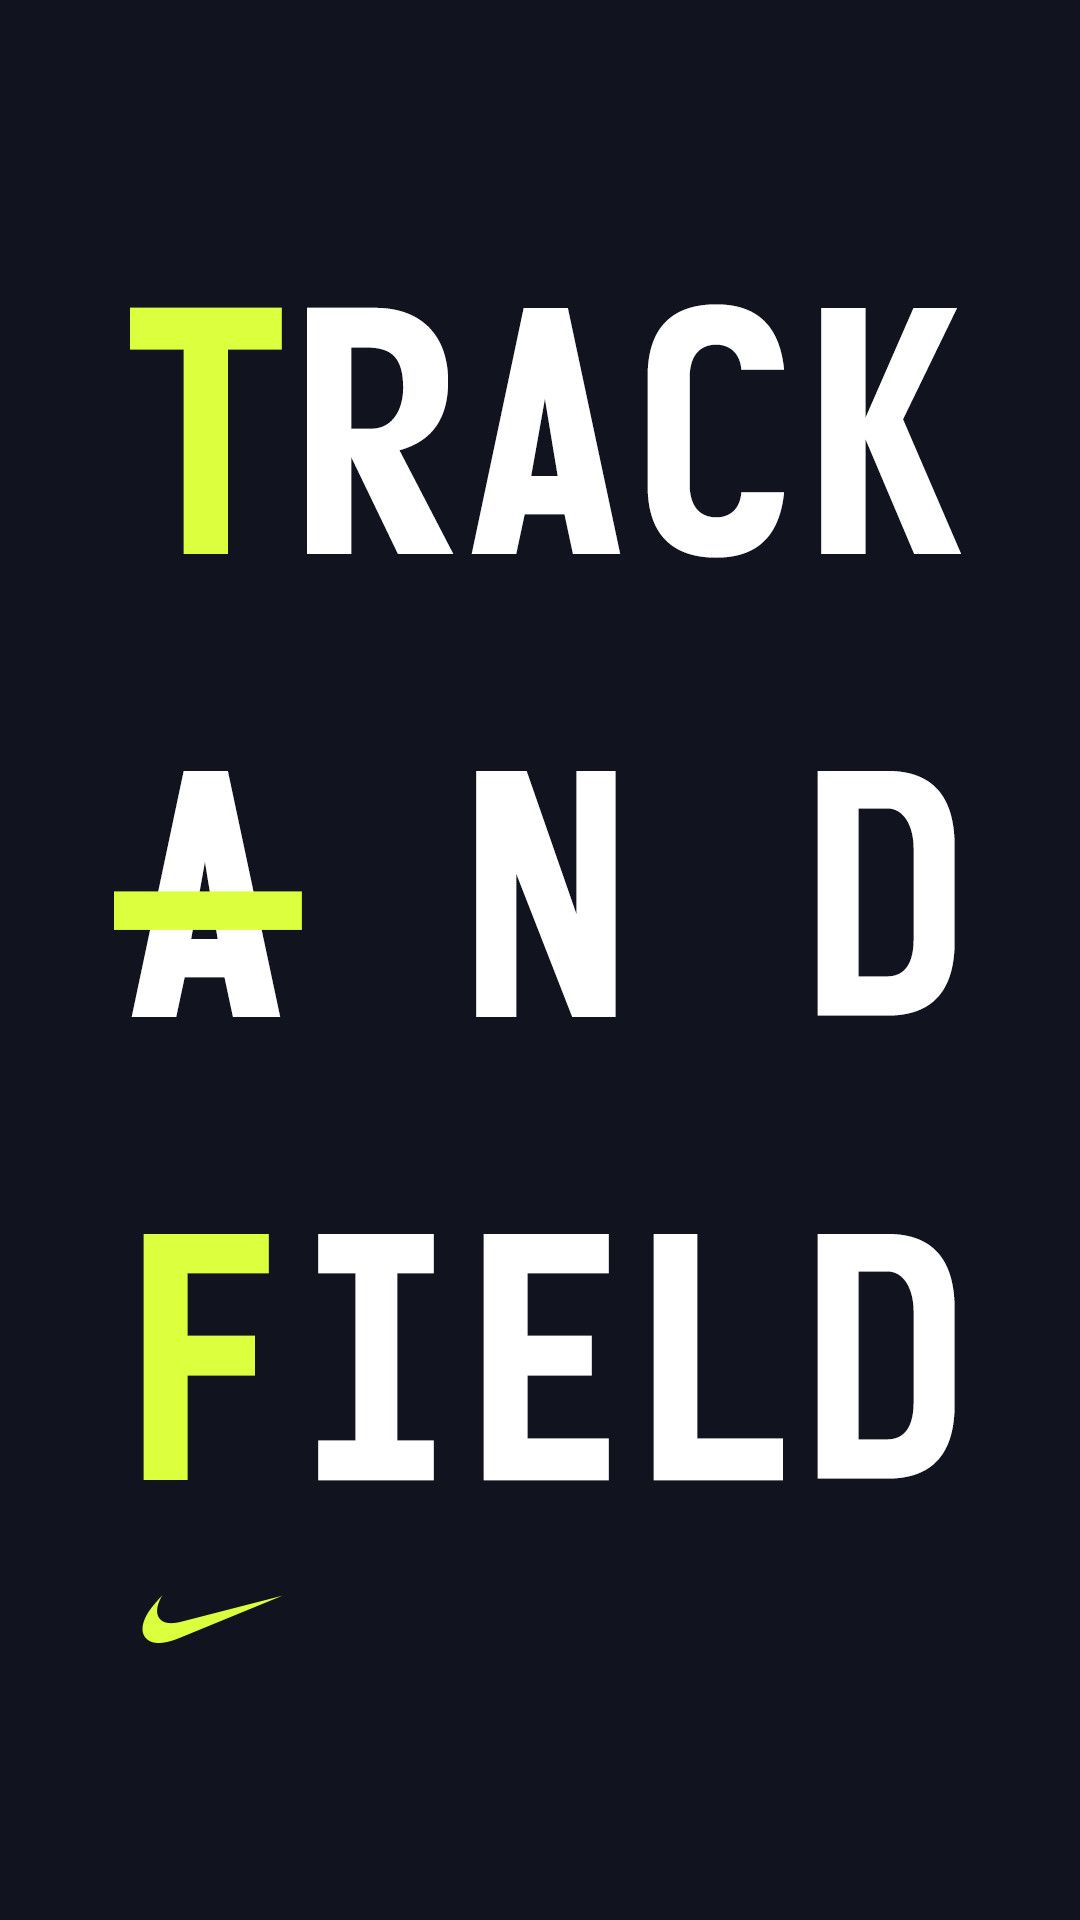 track and field iphone wallpaper